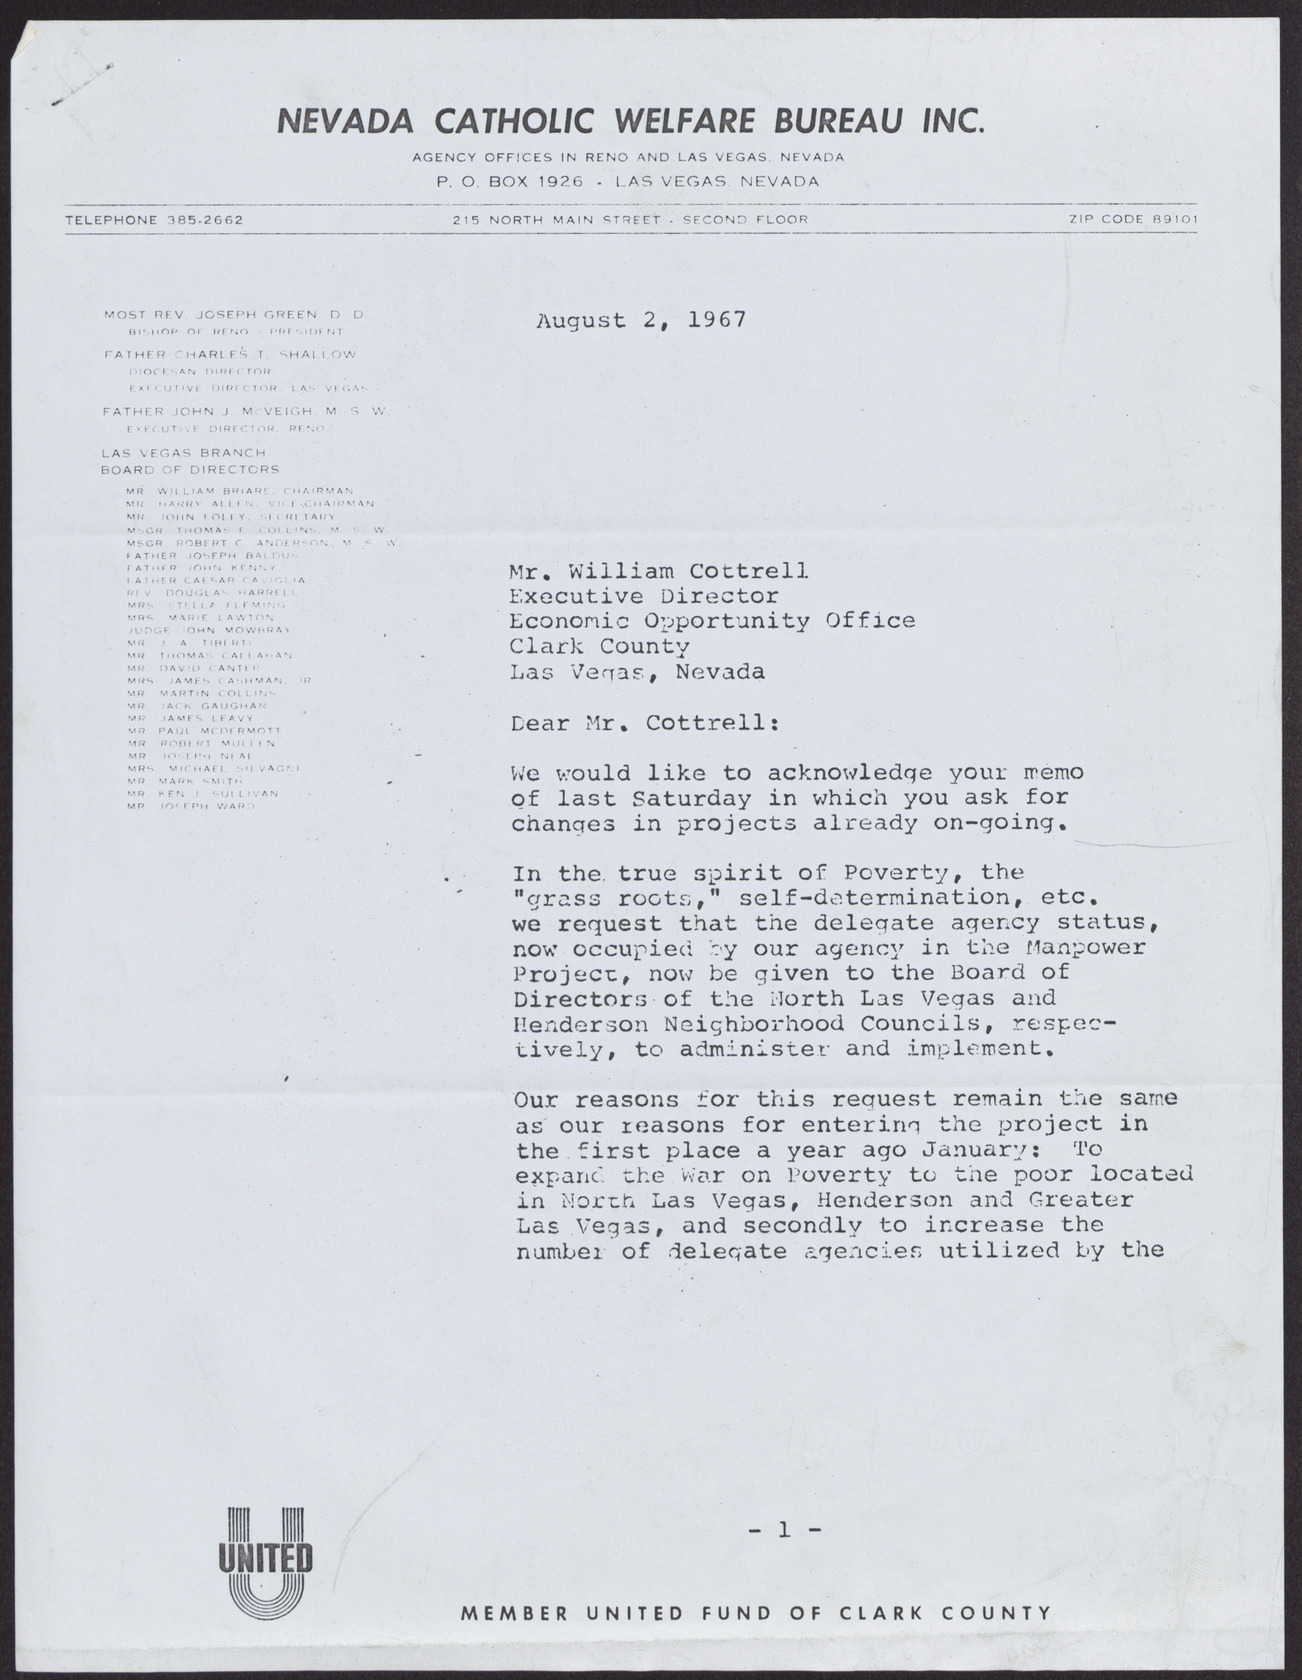 Letter to Mr. William Cottrell from Robert W. Fahey (2 pages), August 2, 1967